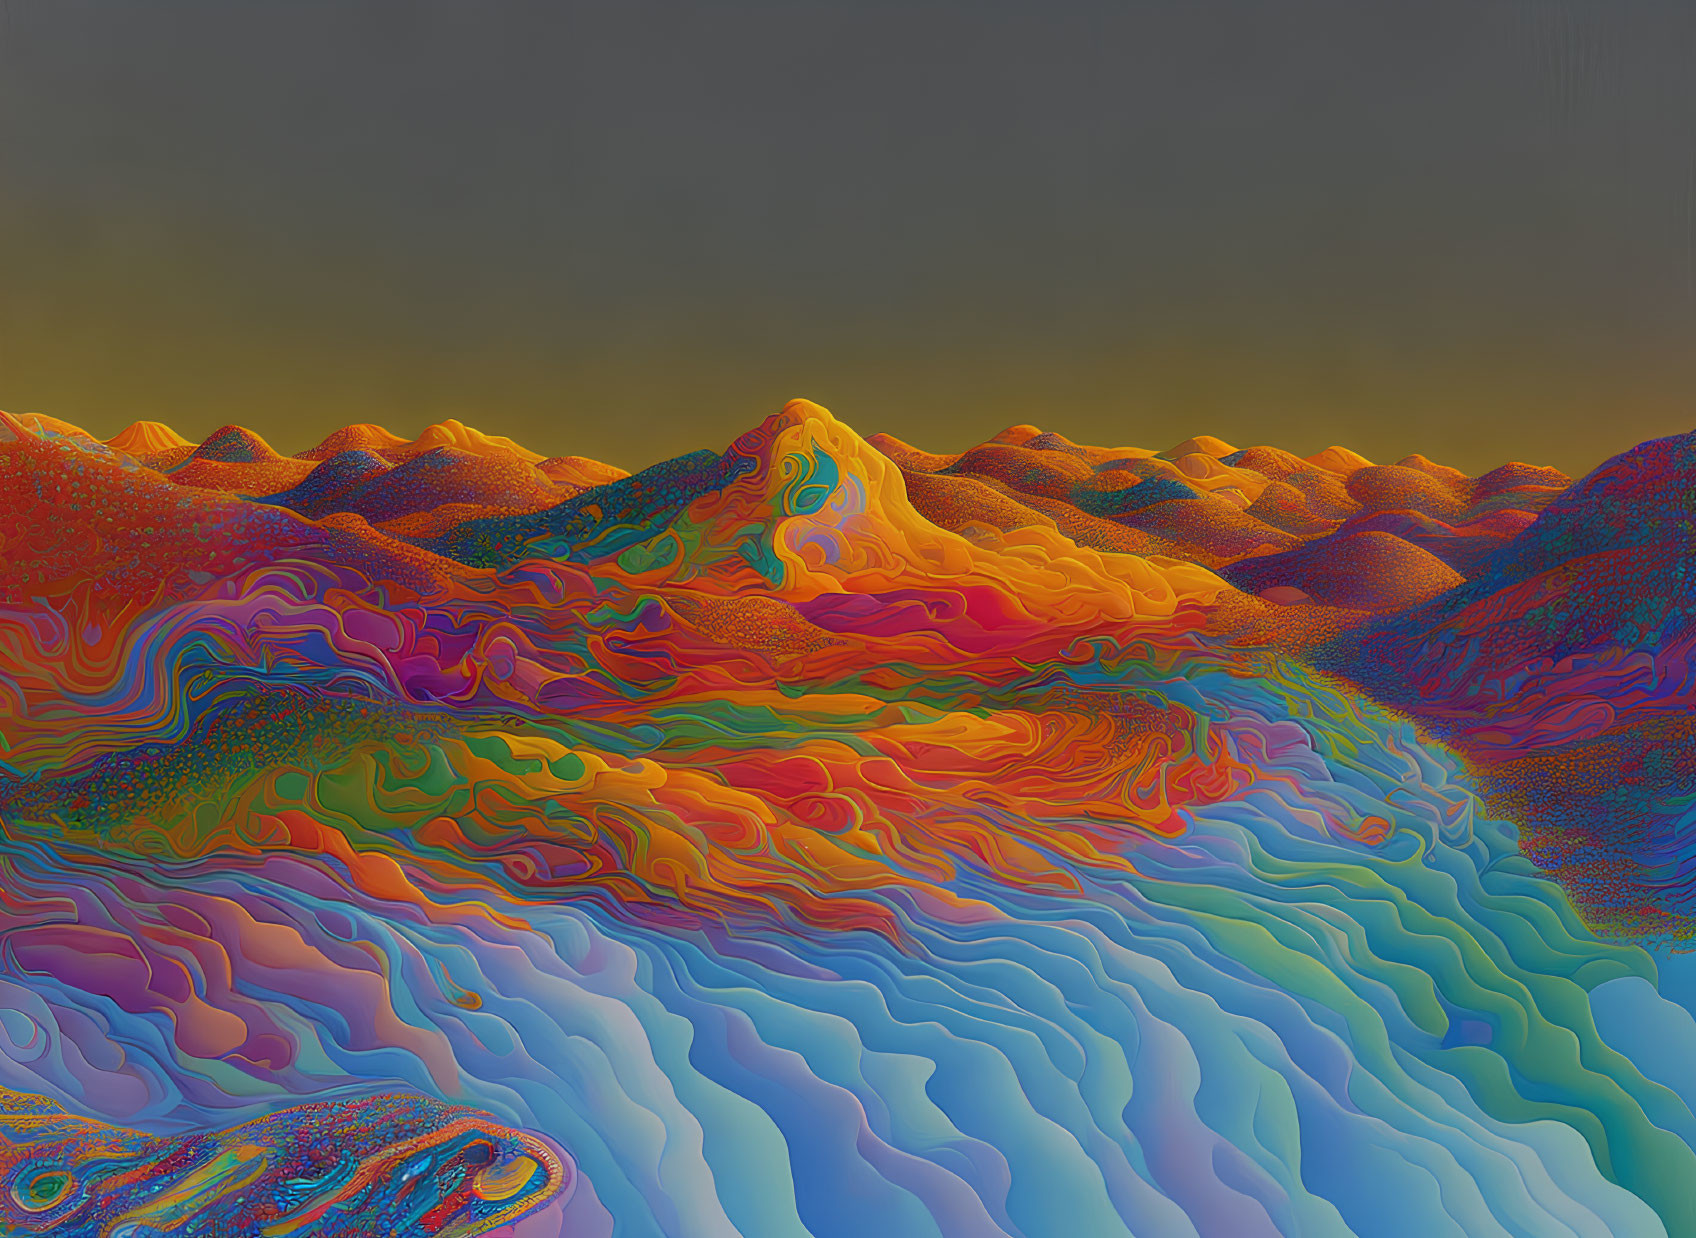 Colorful Psychedelic Landscape with Undulating Hills in Spectrum